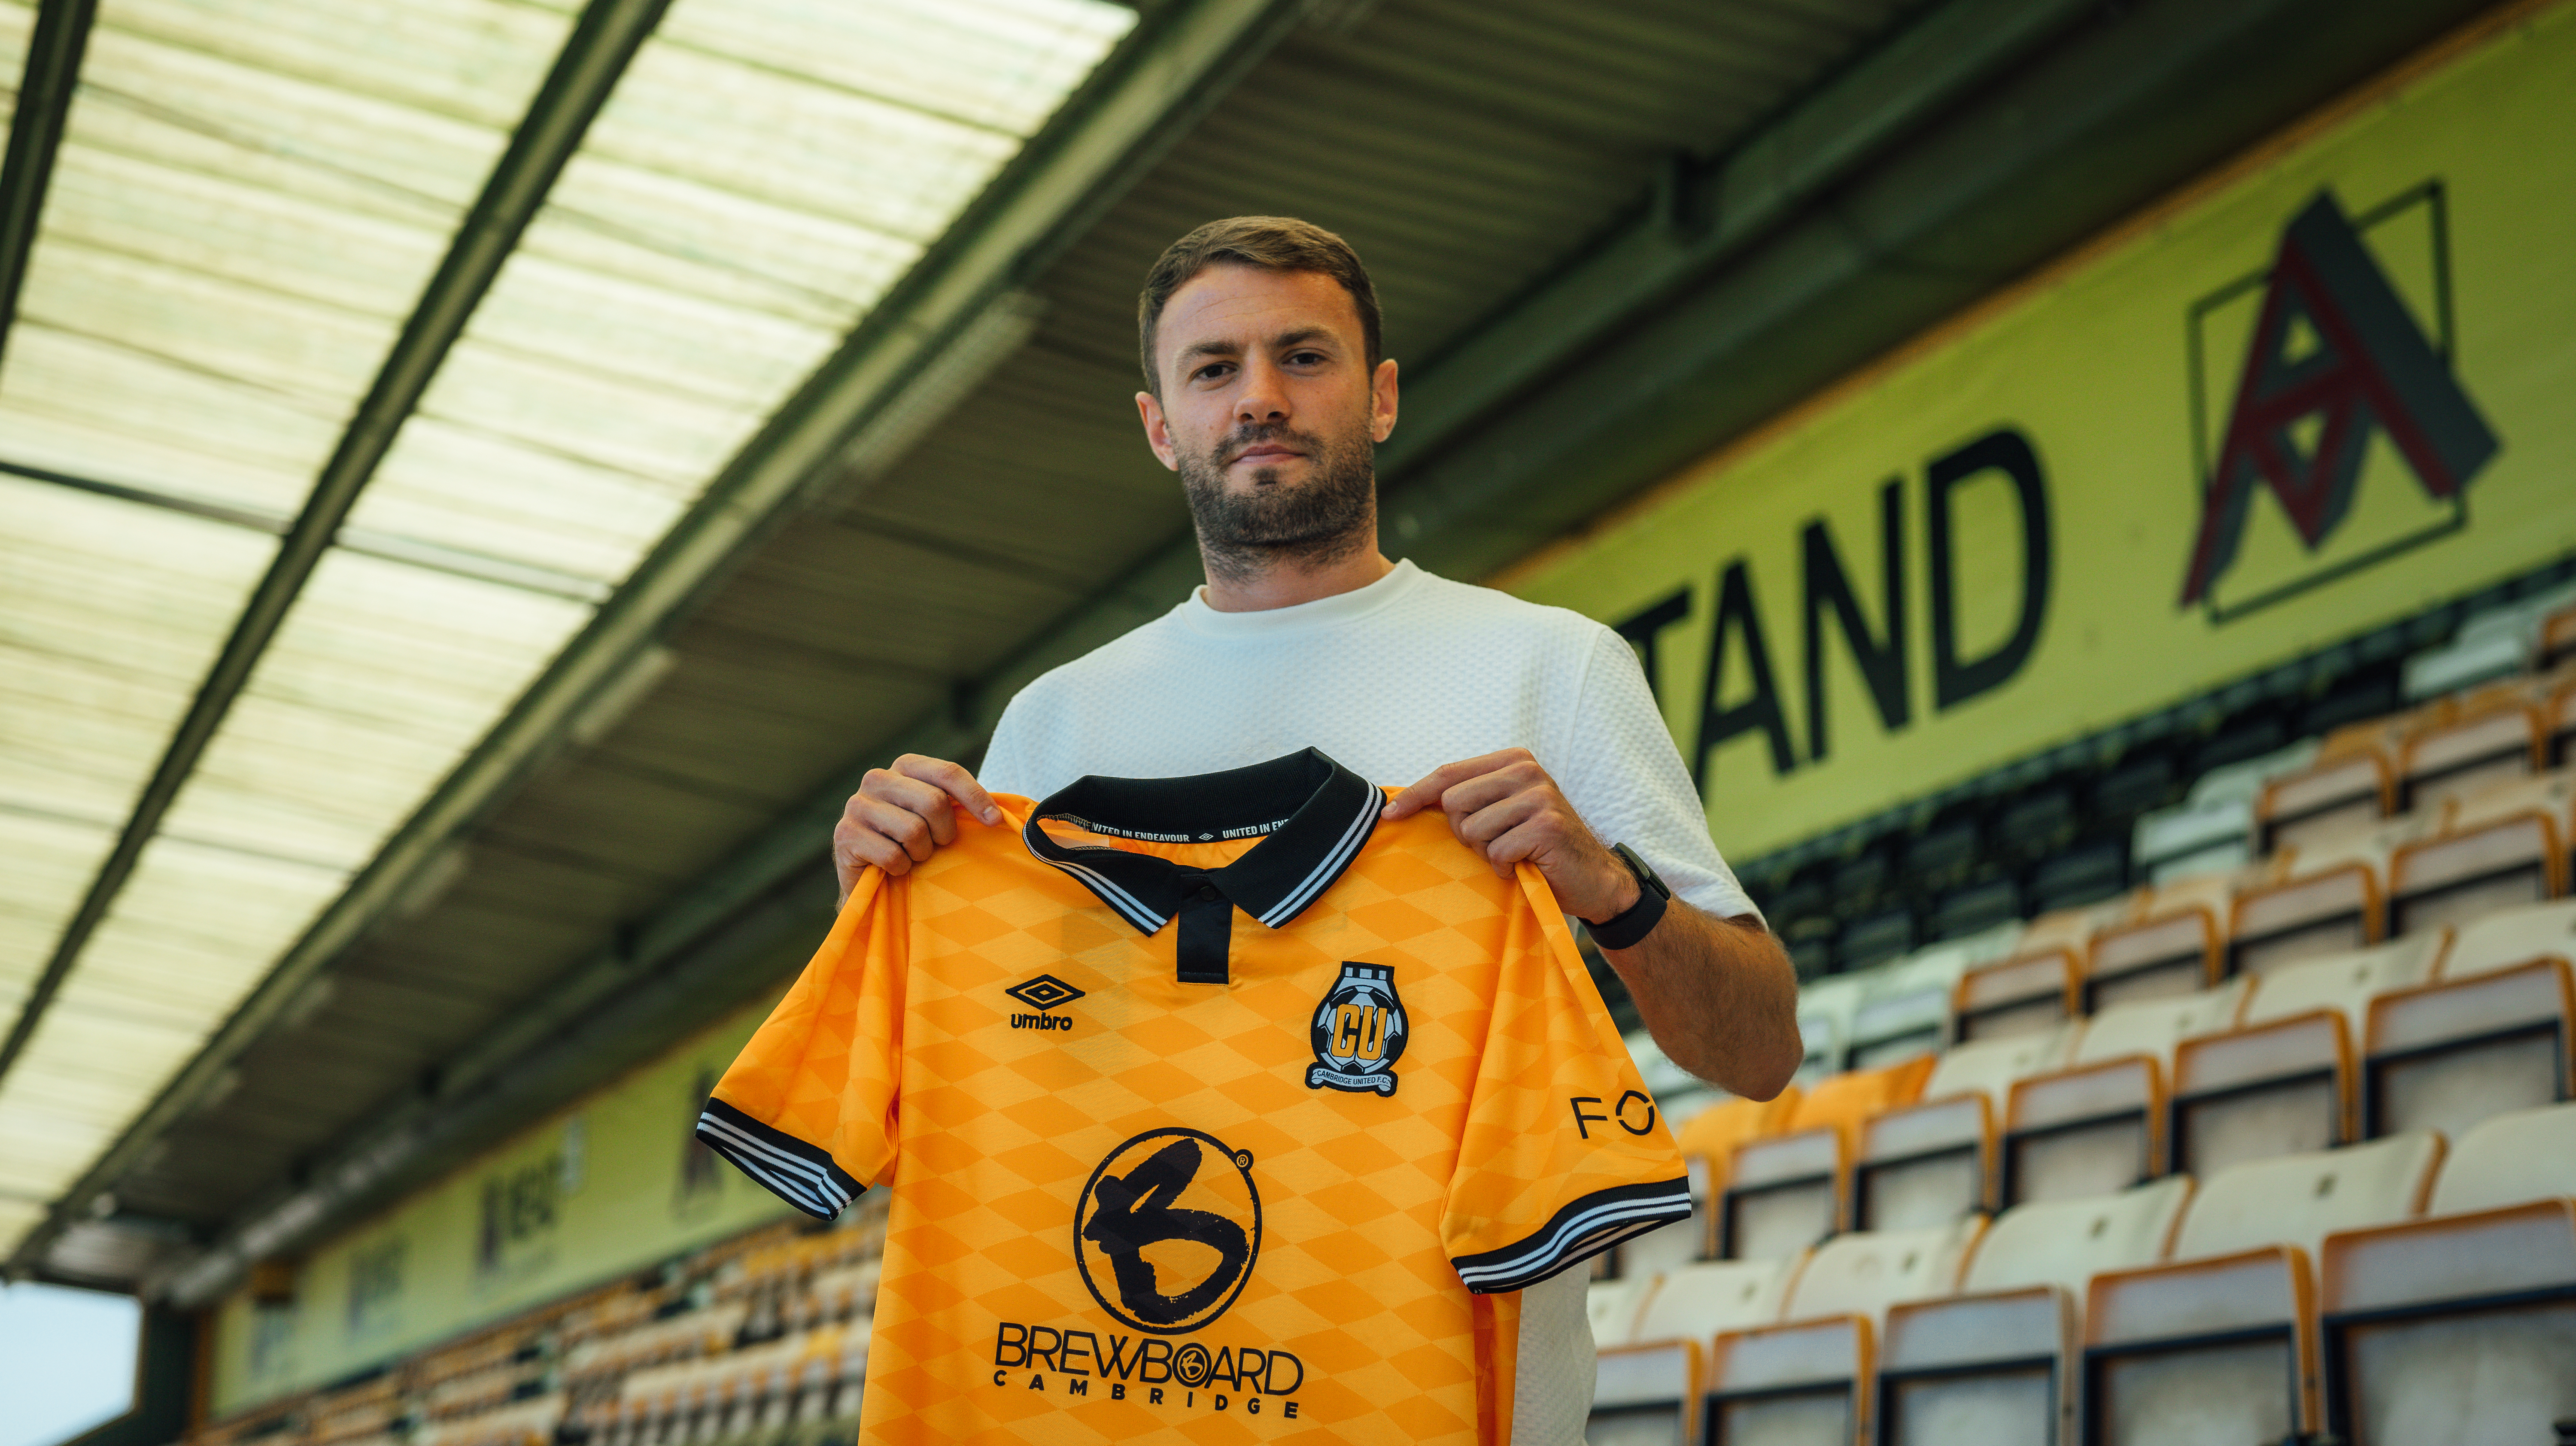 James Gibbons hold the home shirt